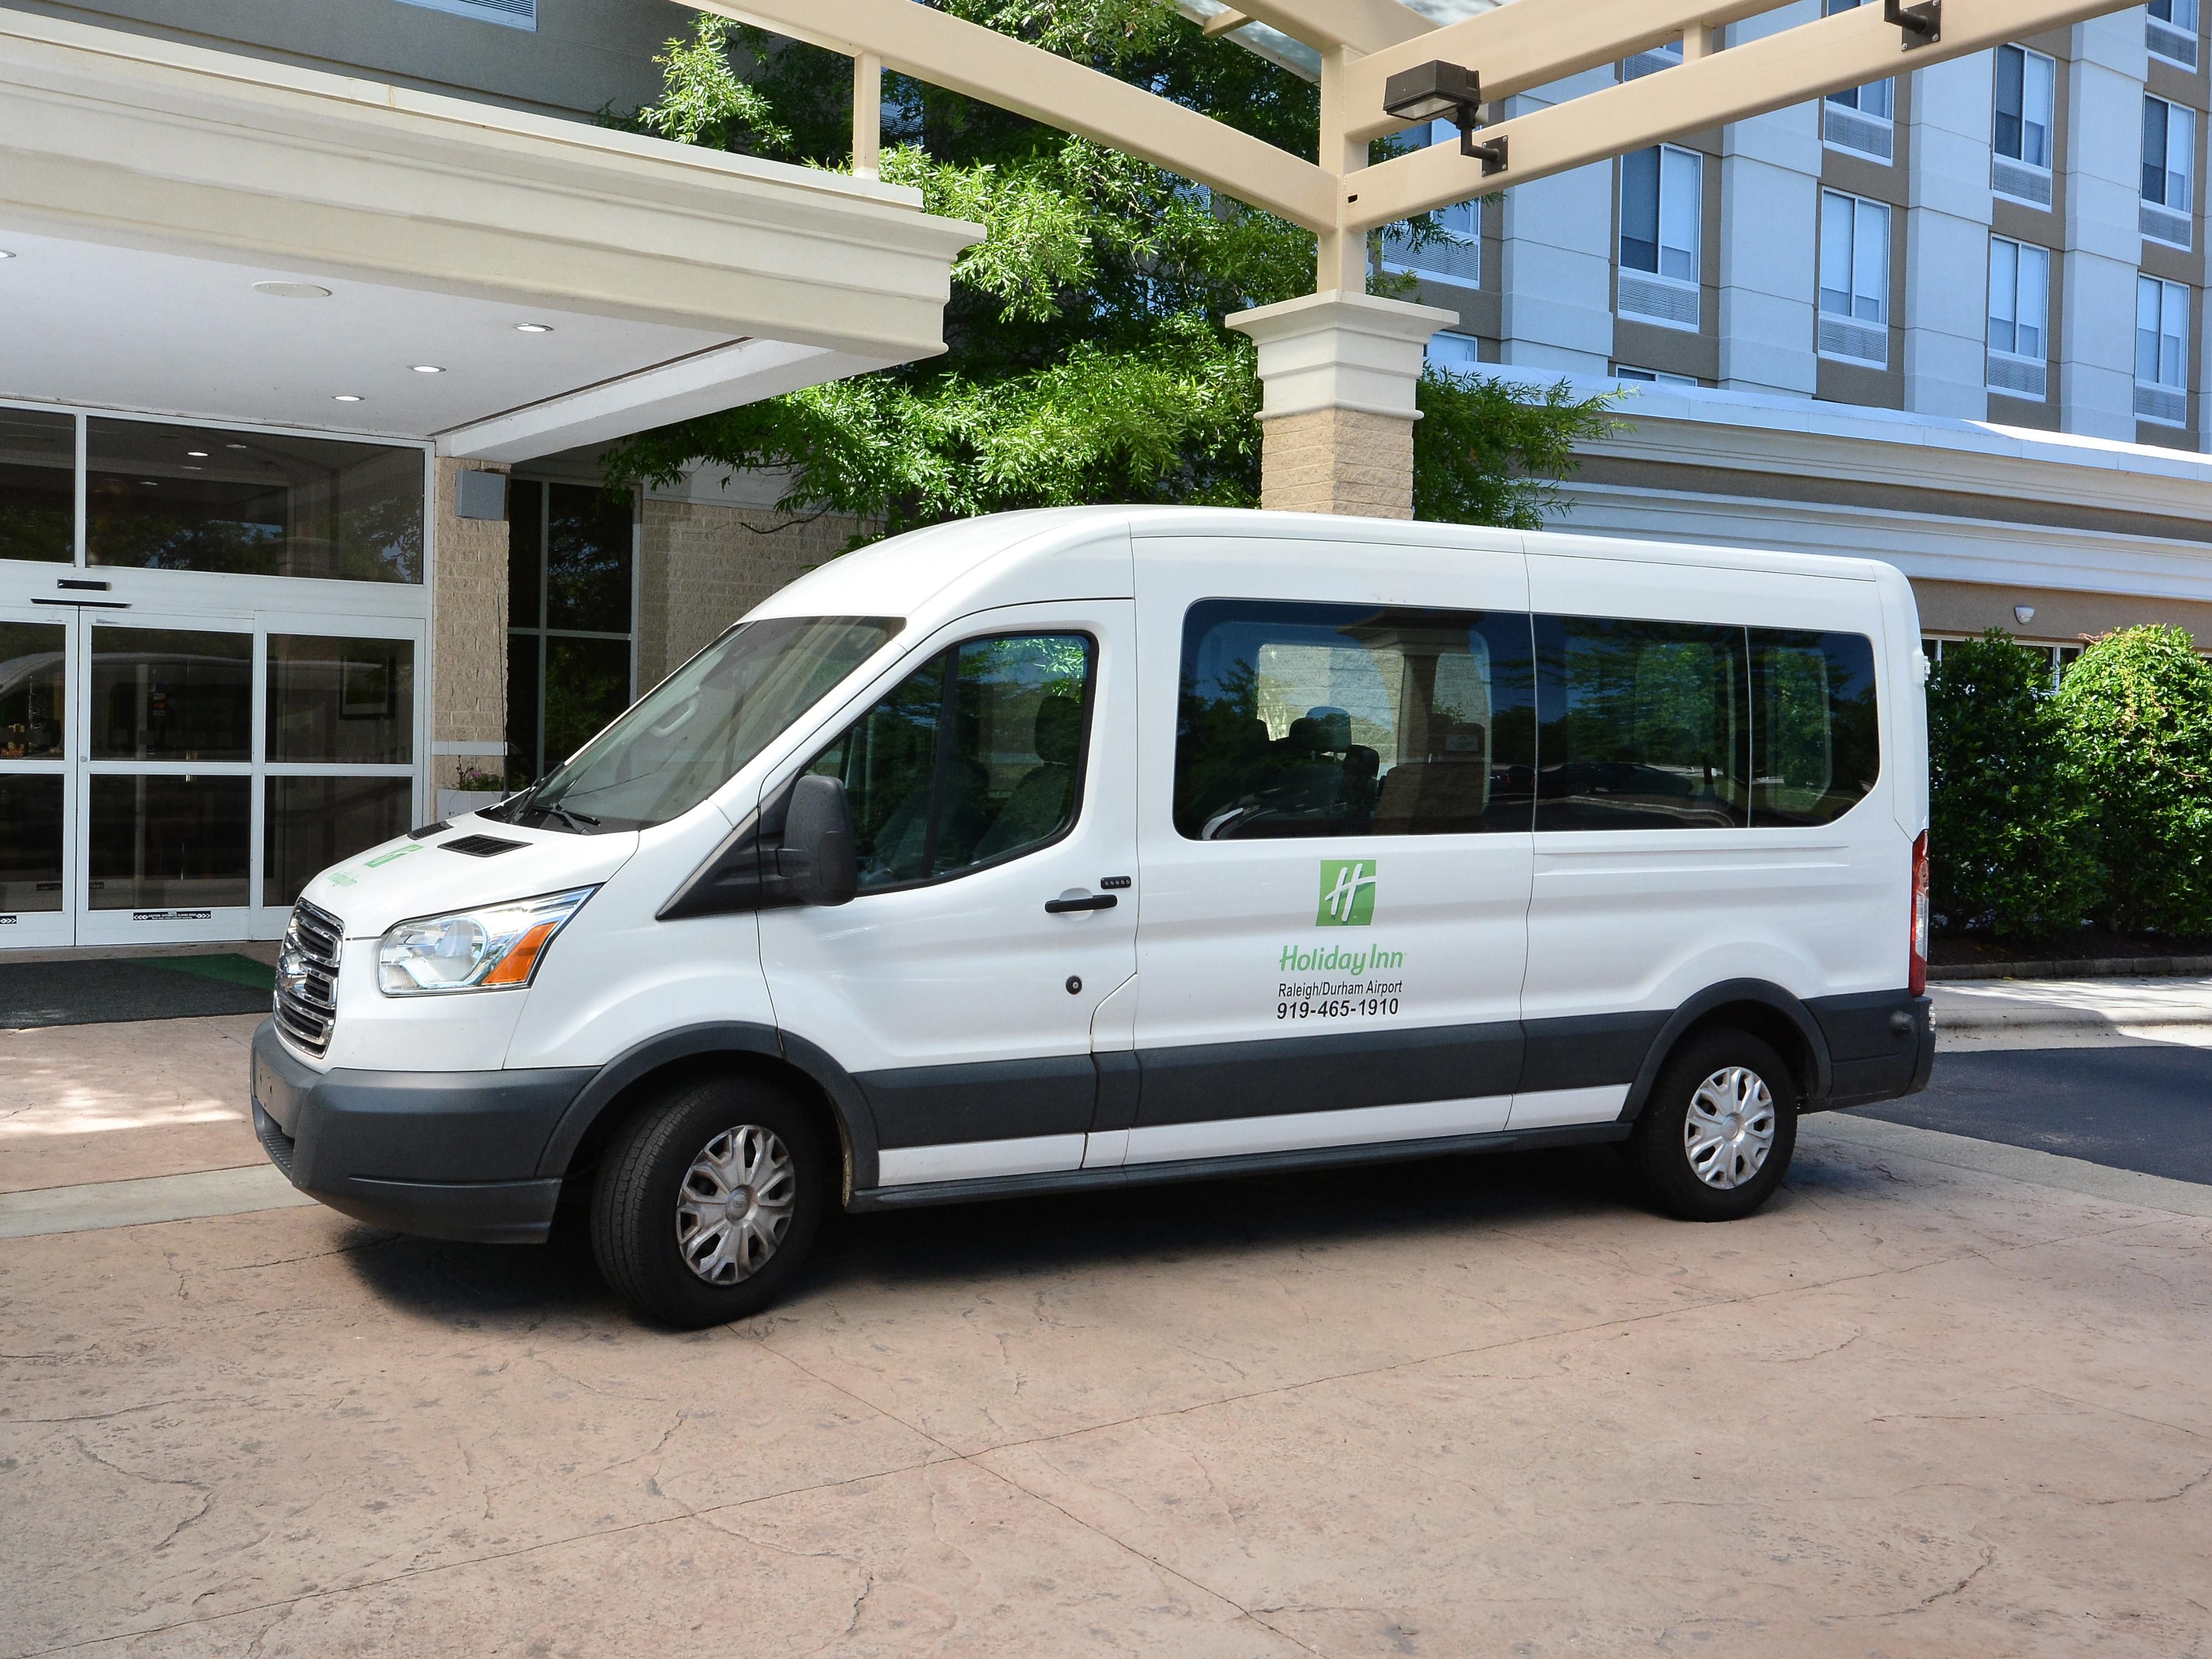 Our complimentary shuttle runs to and from the RDU Airport as well as to area businesses within a 5-mile radius.  Shuttle service begins at 4 AM and ends at 1AM. Schedule your departure time with the front desk at check-in.
Upon return, just call the hotel for shuttle pick-up once you have claimed your bags.  